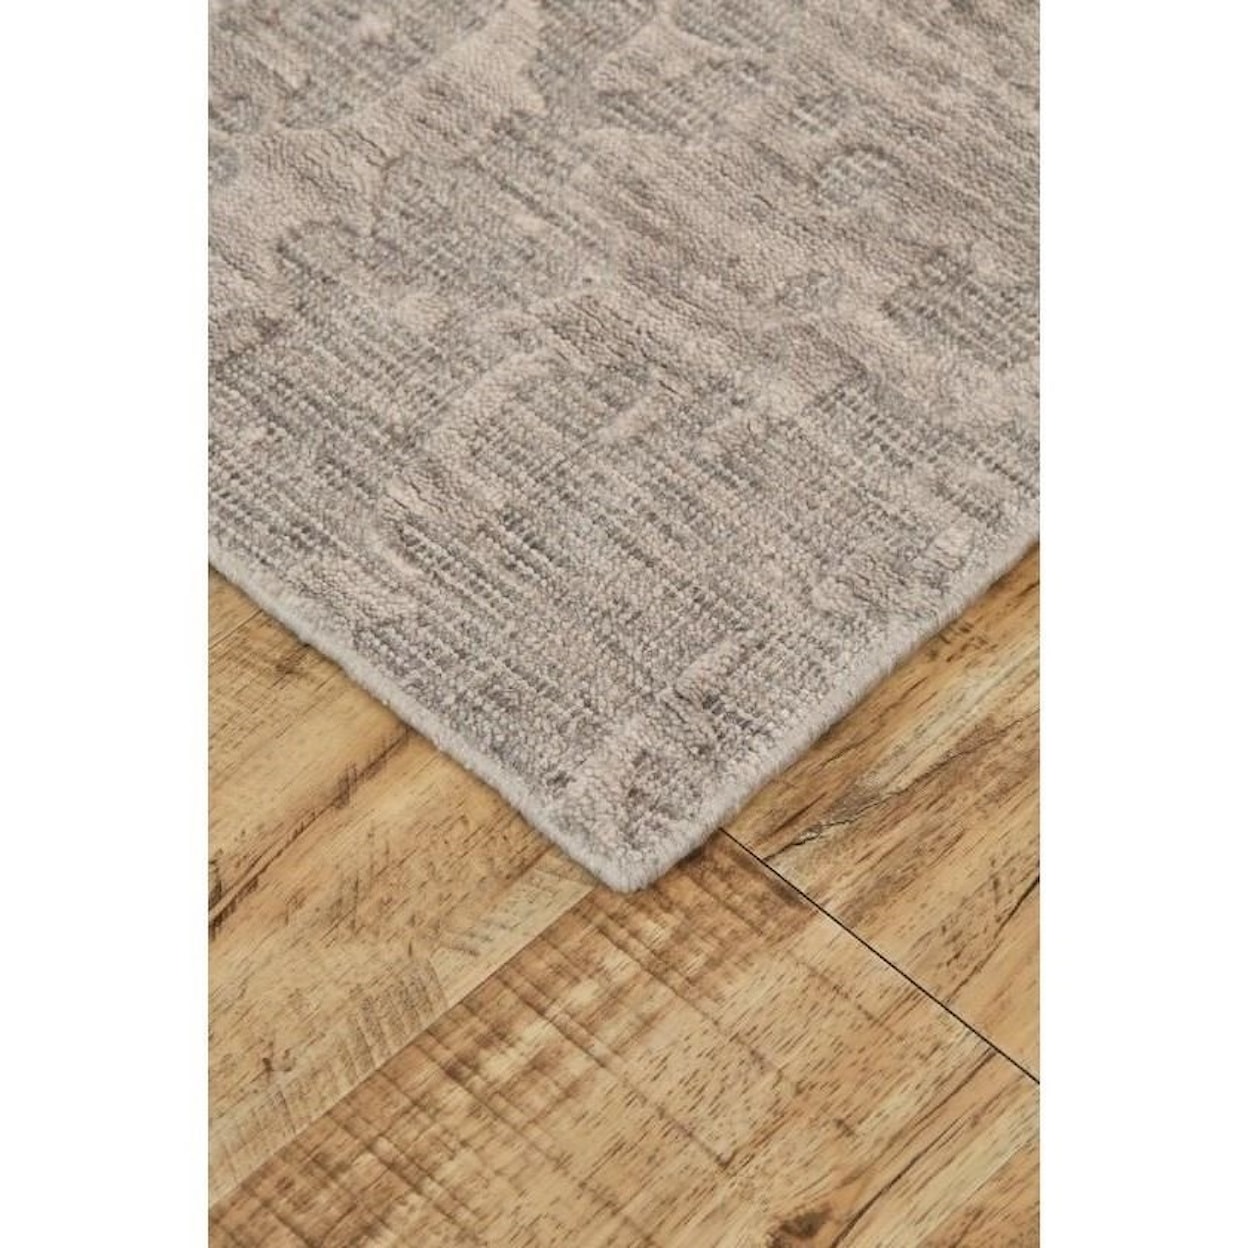 Feizy Rugs Leilani Taupe 8'-6" x 11'-6" Area Rug